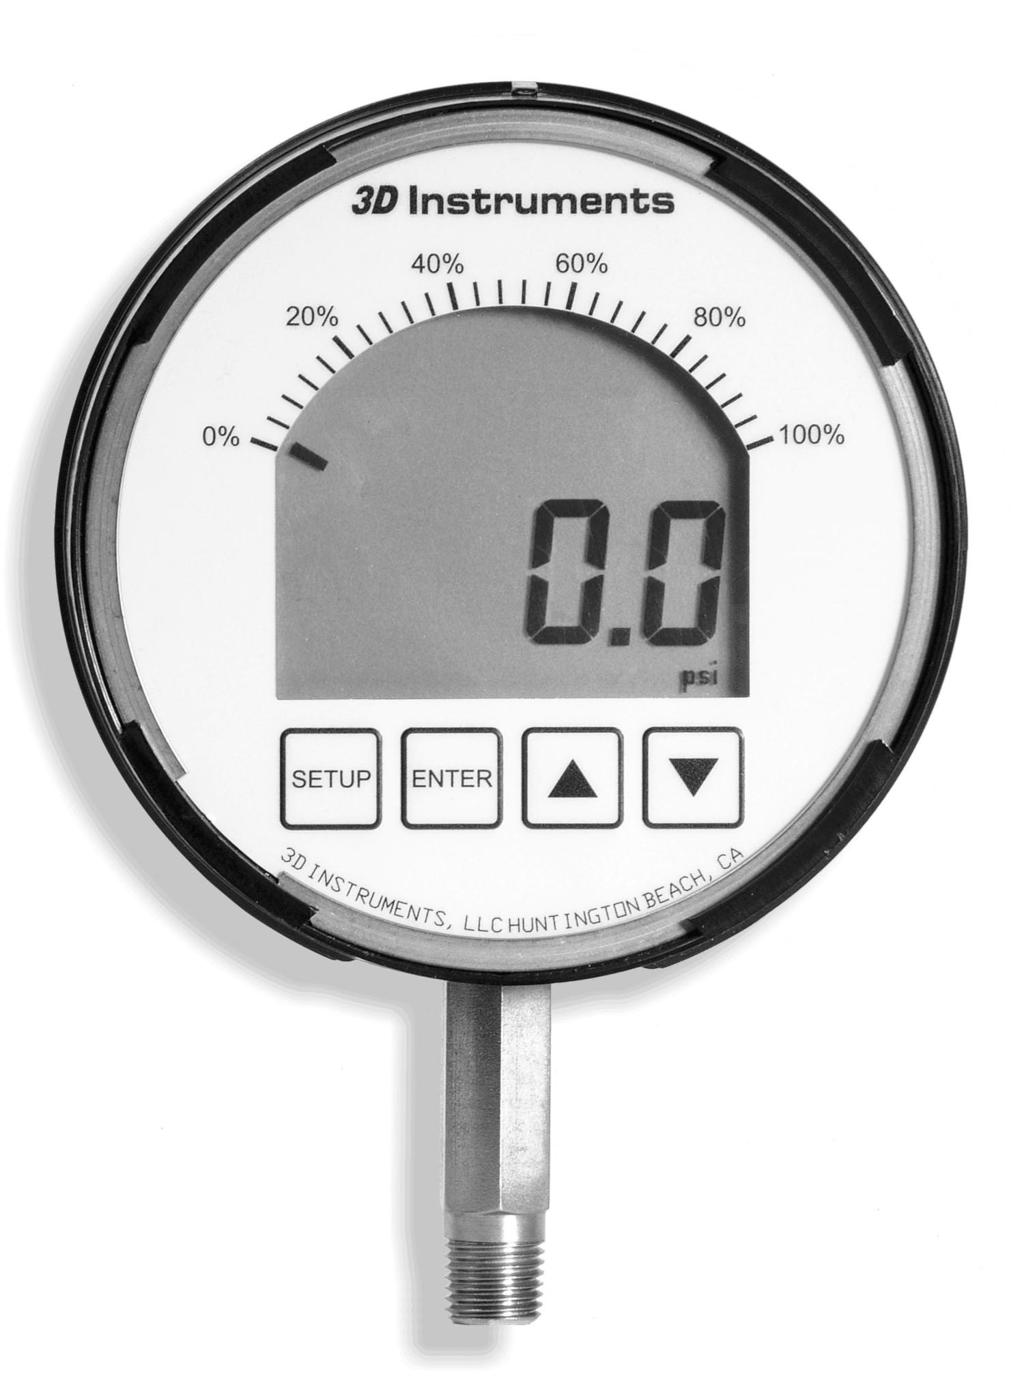 DPG-6700 Instruction Sheet The Direct Drive Difference in Digital Form DPG-6700 INTRODUCTION The 3D Digital Pressure Gauge DPG-6700 is a loop powered electronic instrument designed for applications